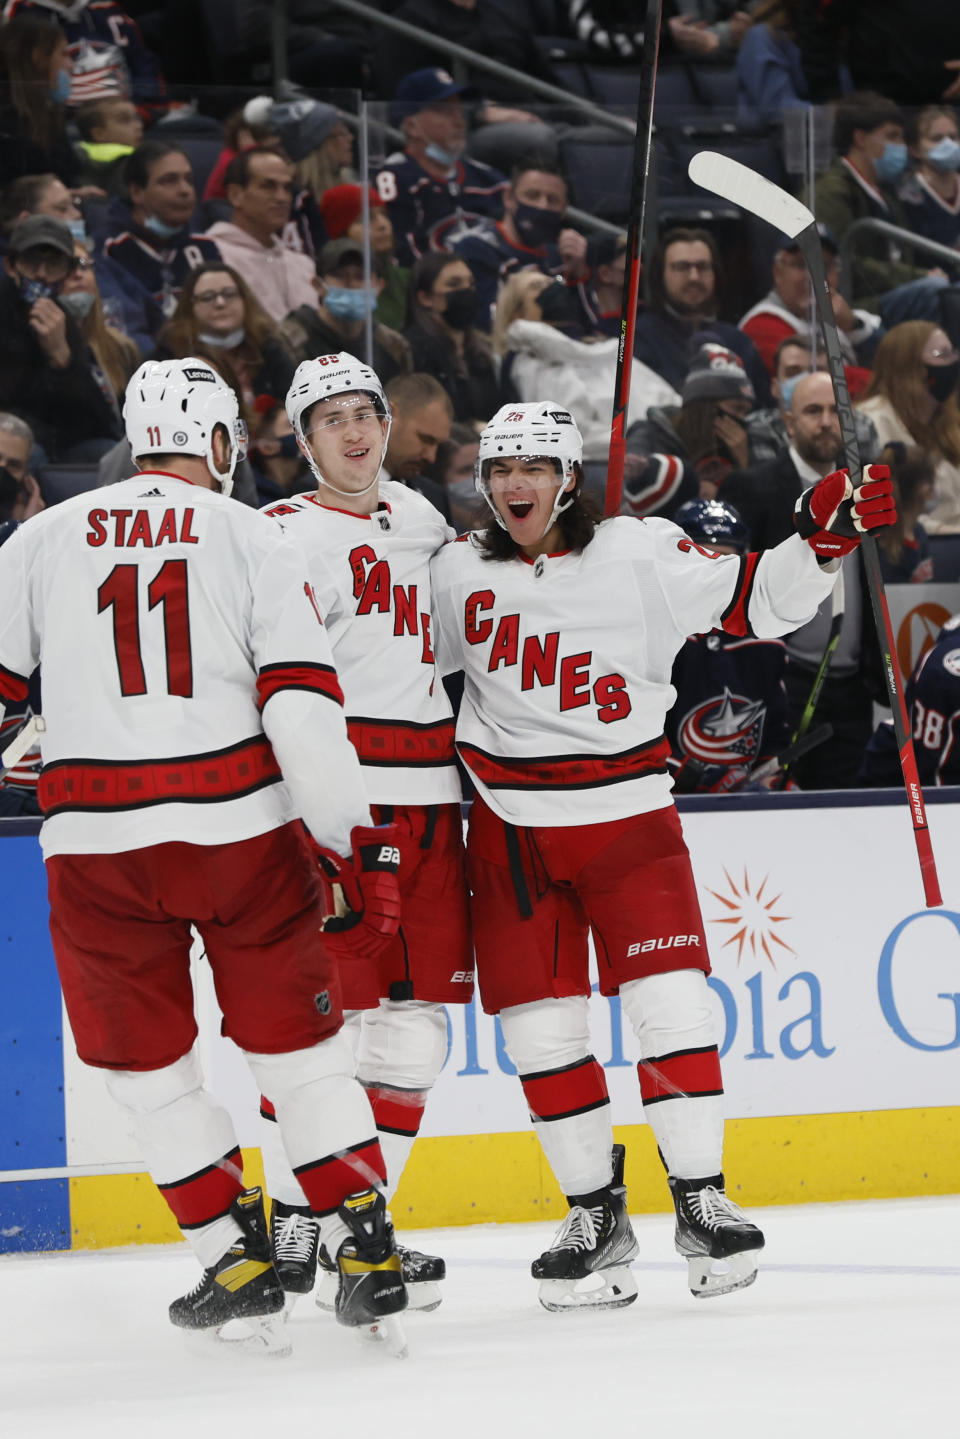 Carolina Hurricanes' Ethan Bear, right, celebrates his goal against the Columbus Blue Jackets with teammates Martin Necas, center, and Jordan Staal during the third period of an NHL hockey game Saturday, Jan. 1, 2022, in Columbus, Ohio. (AP Photo/Jay LaPrete)